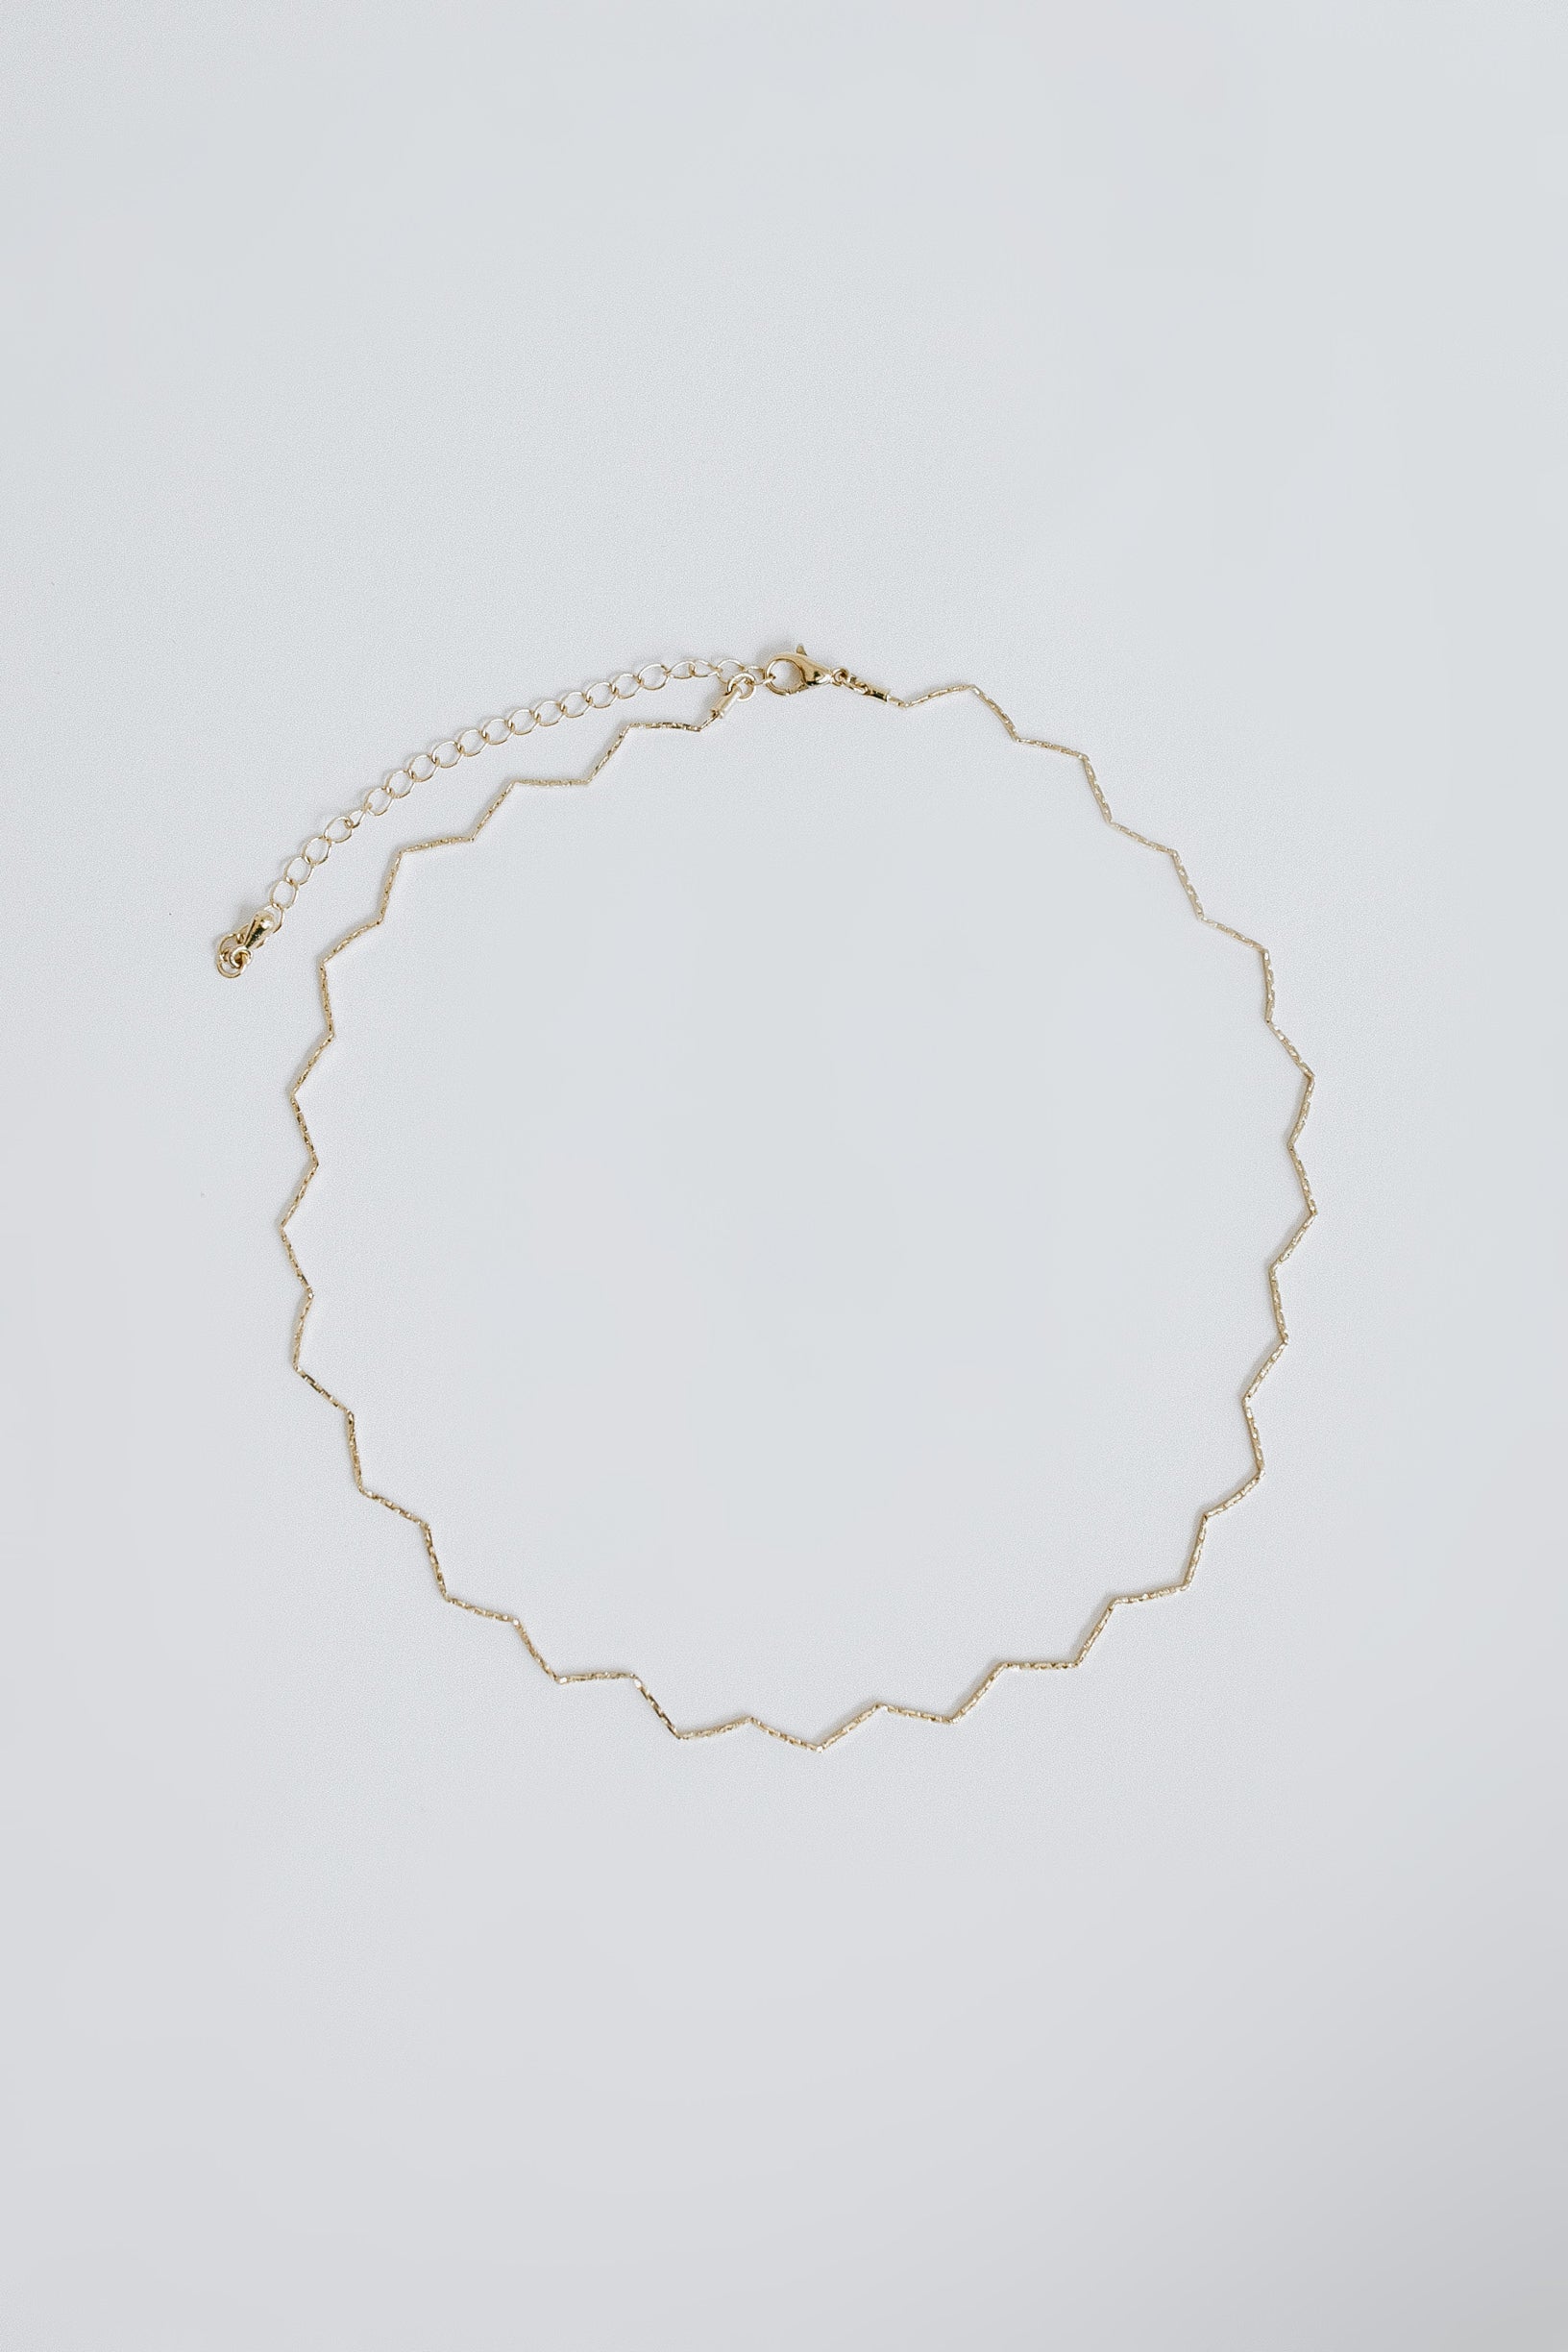 Stay Wavy Chain Necklace - Gold